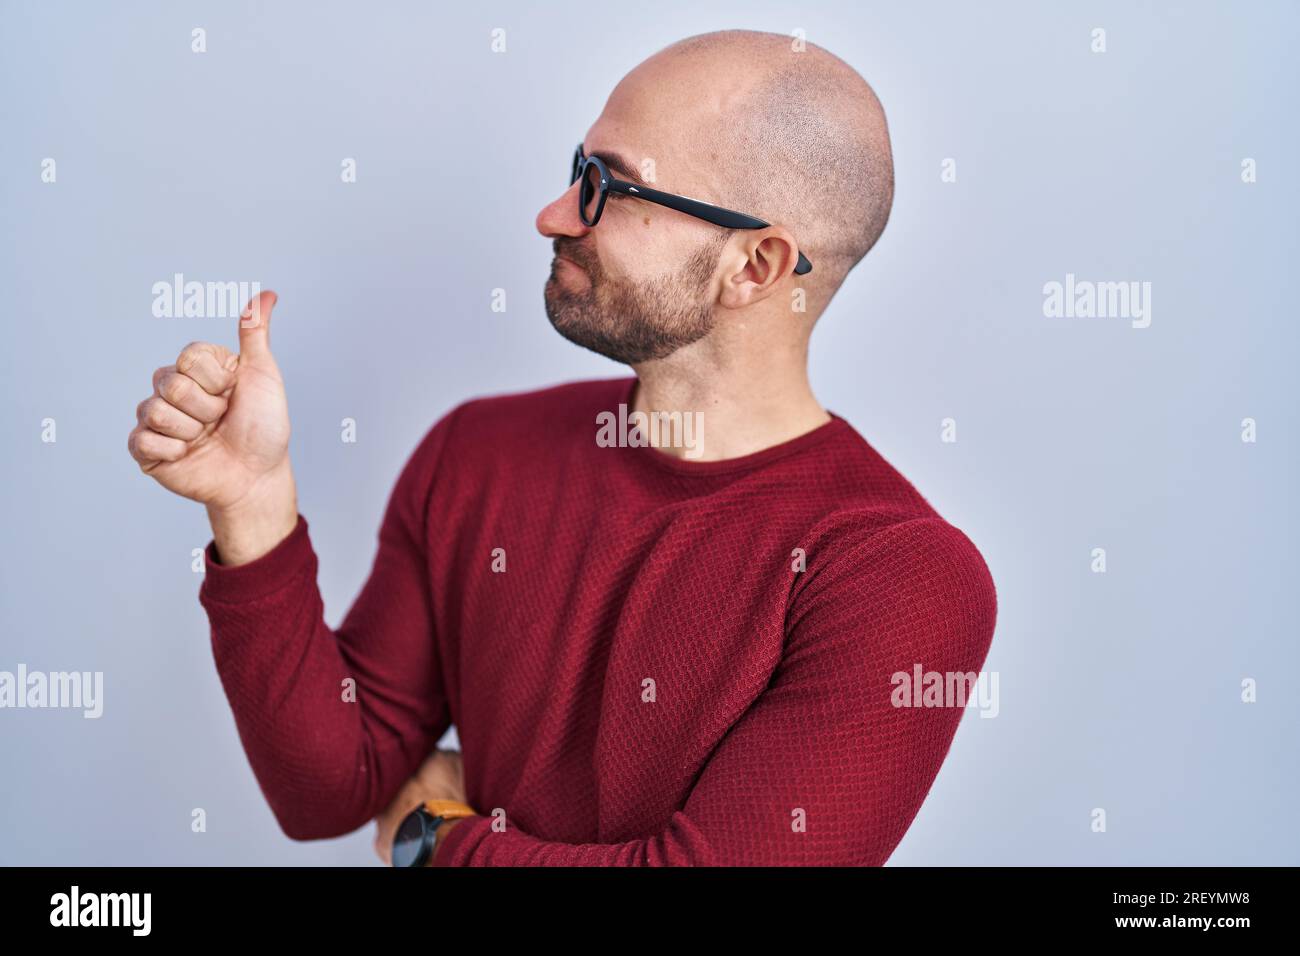 Young bald man with beard standing over white background wearing glasses looking proud, smiling doing thumbs up gesture to the side Stock Photo